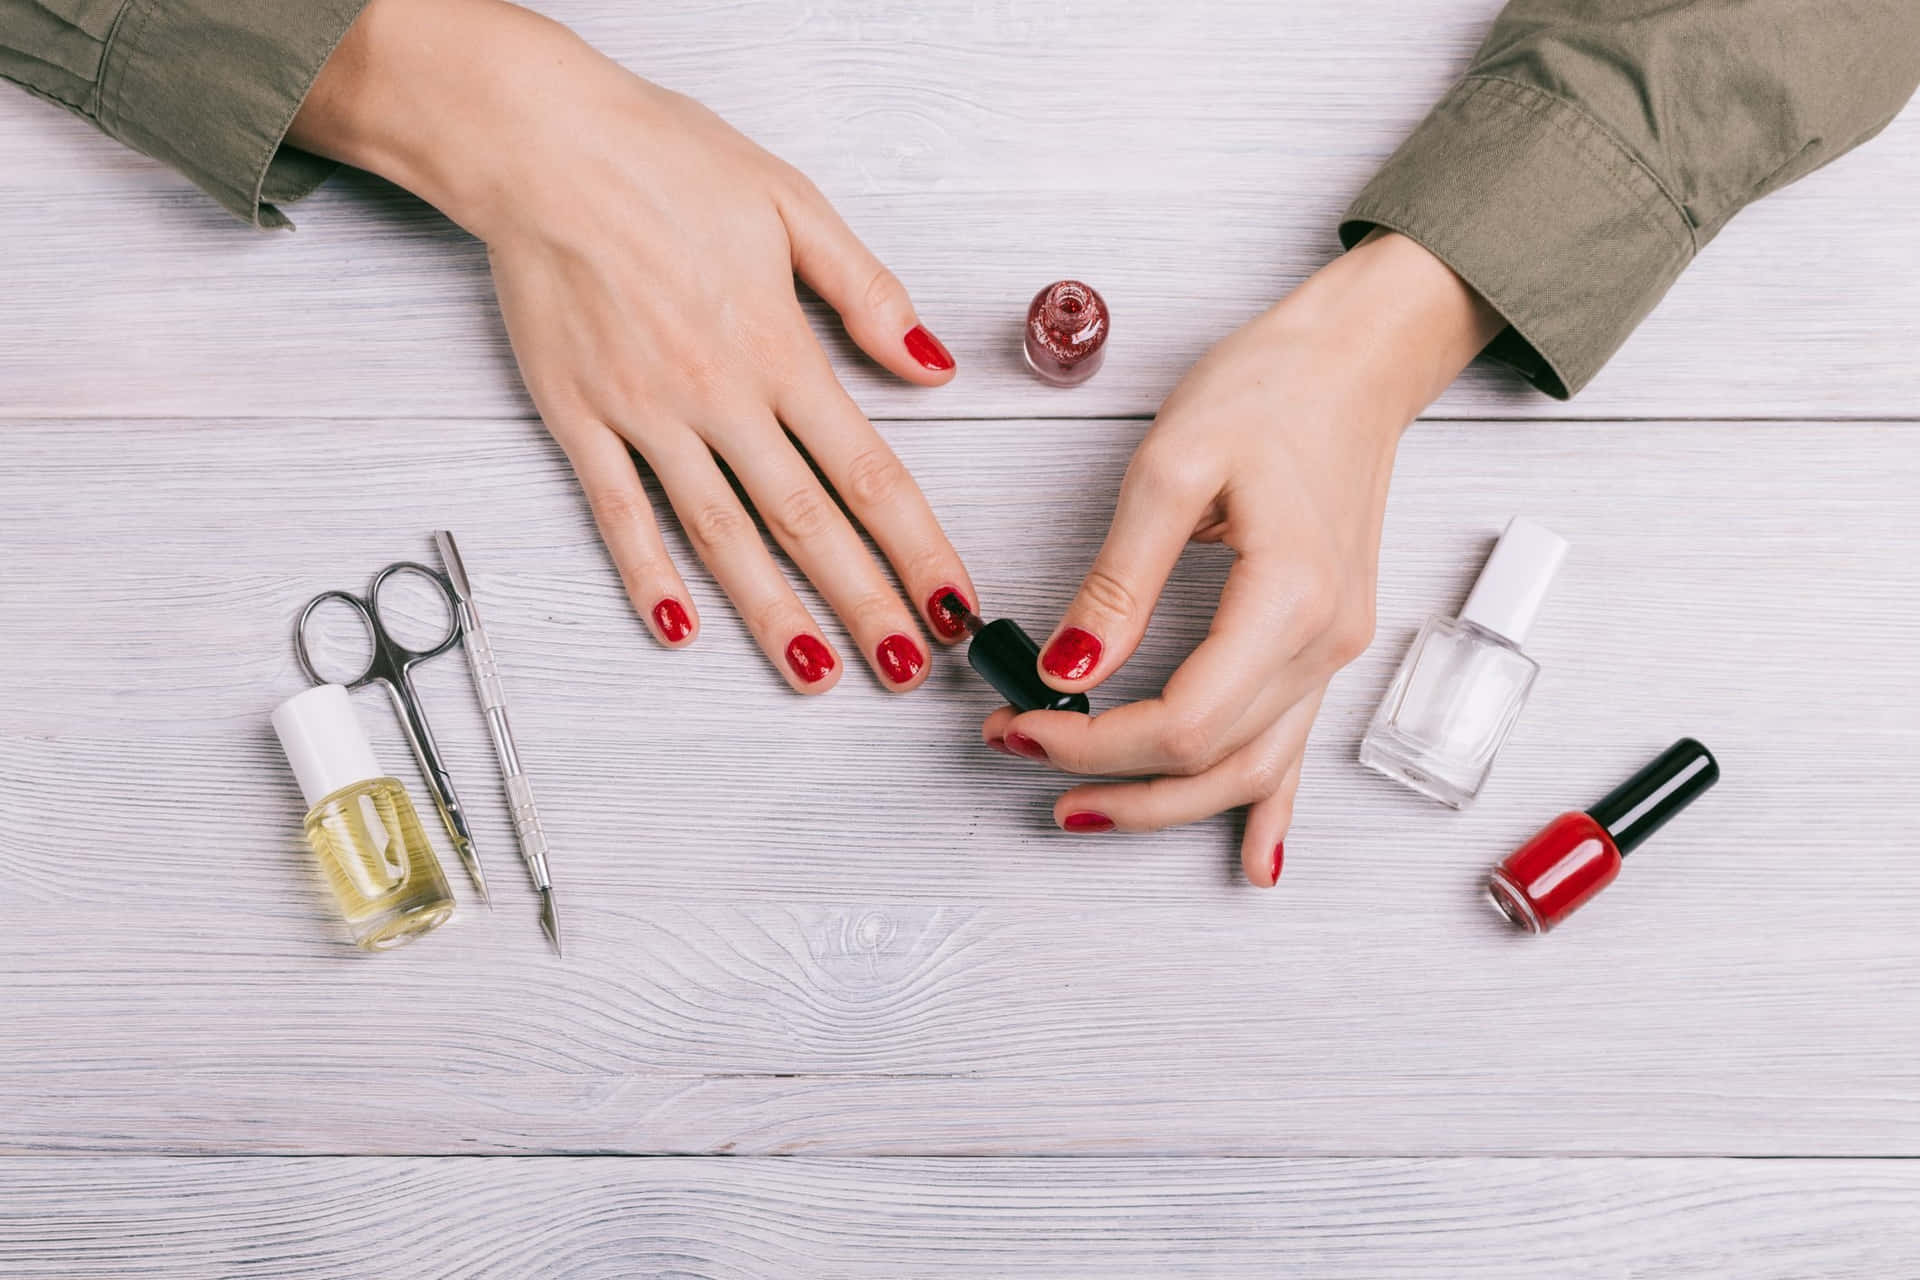 A Woman's Hands With Red Nail Polish And Other Tools On A Wooden Table